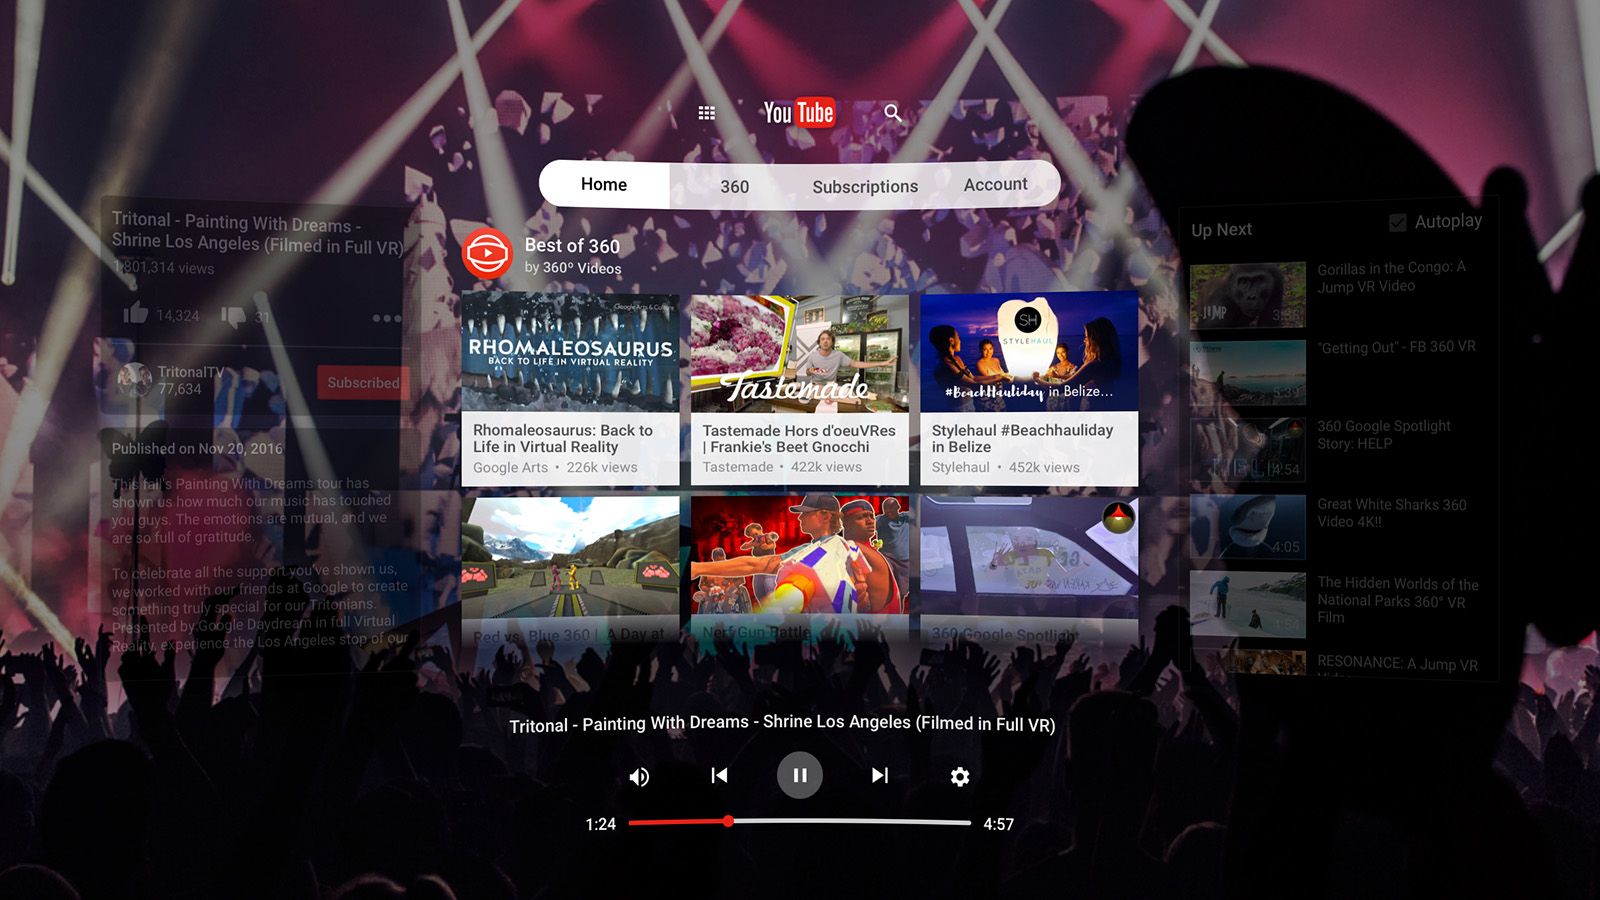 youtube vr app for daydream now available makes viewing vr videos easier image 1